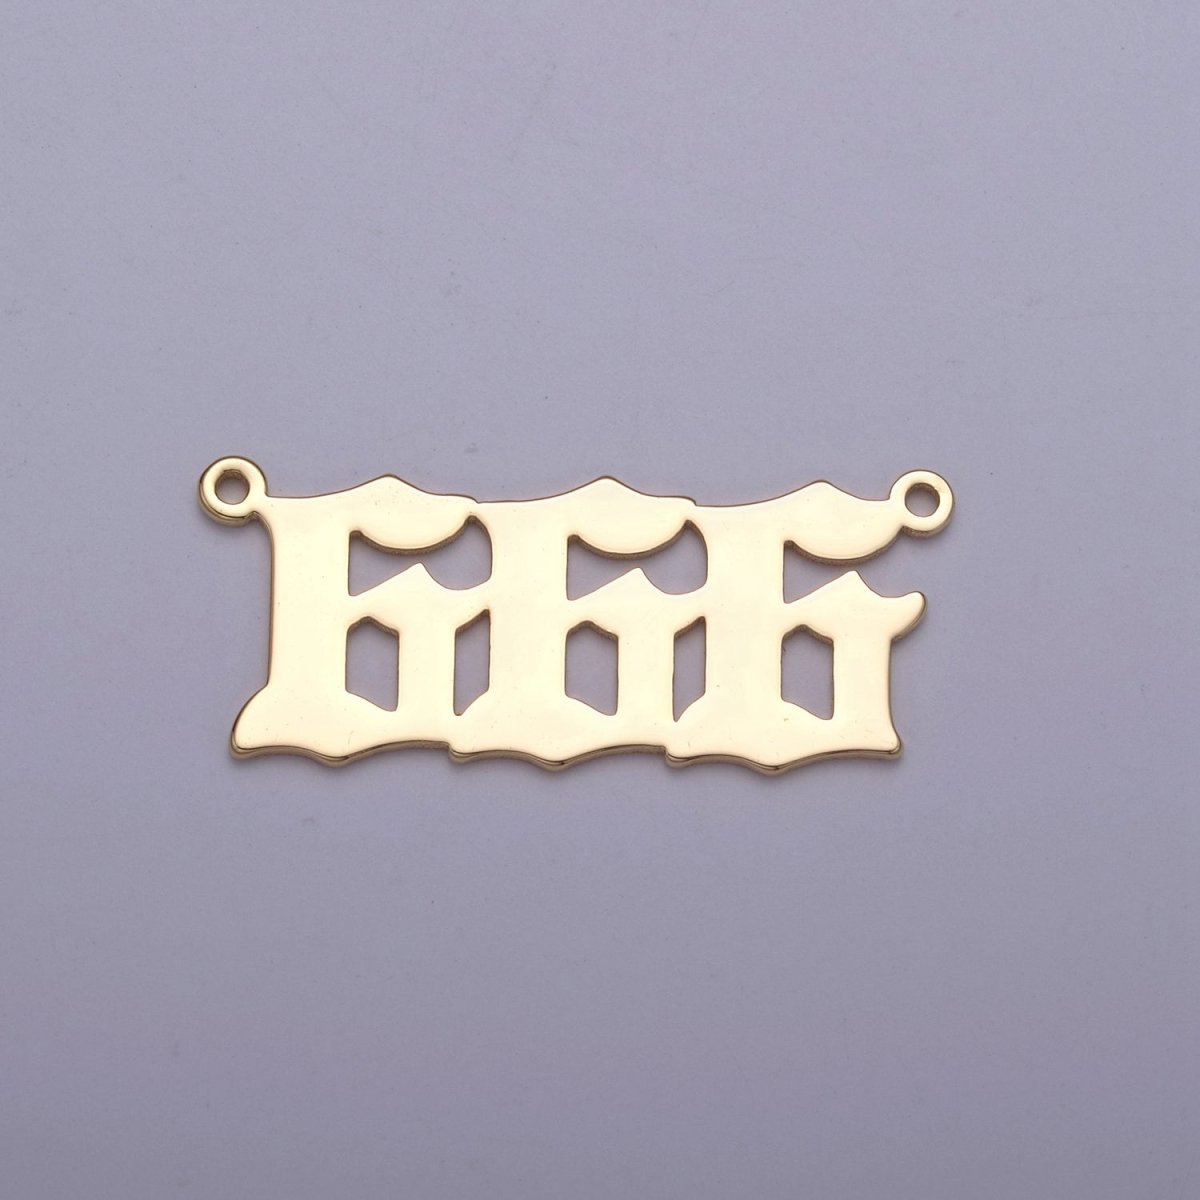 Gold Filled Angel Number Charm Connector Lucky Number for Necklace Bracelet Component F-231 F-261 F-268 F-272 F-277 F-279 F-281 F-283 F-310 - DLUXCA